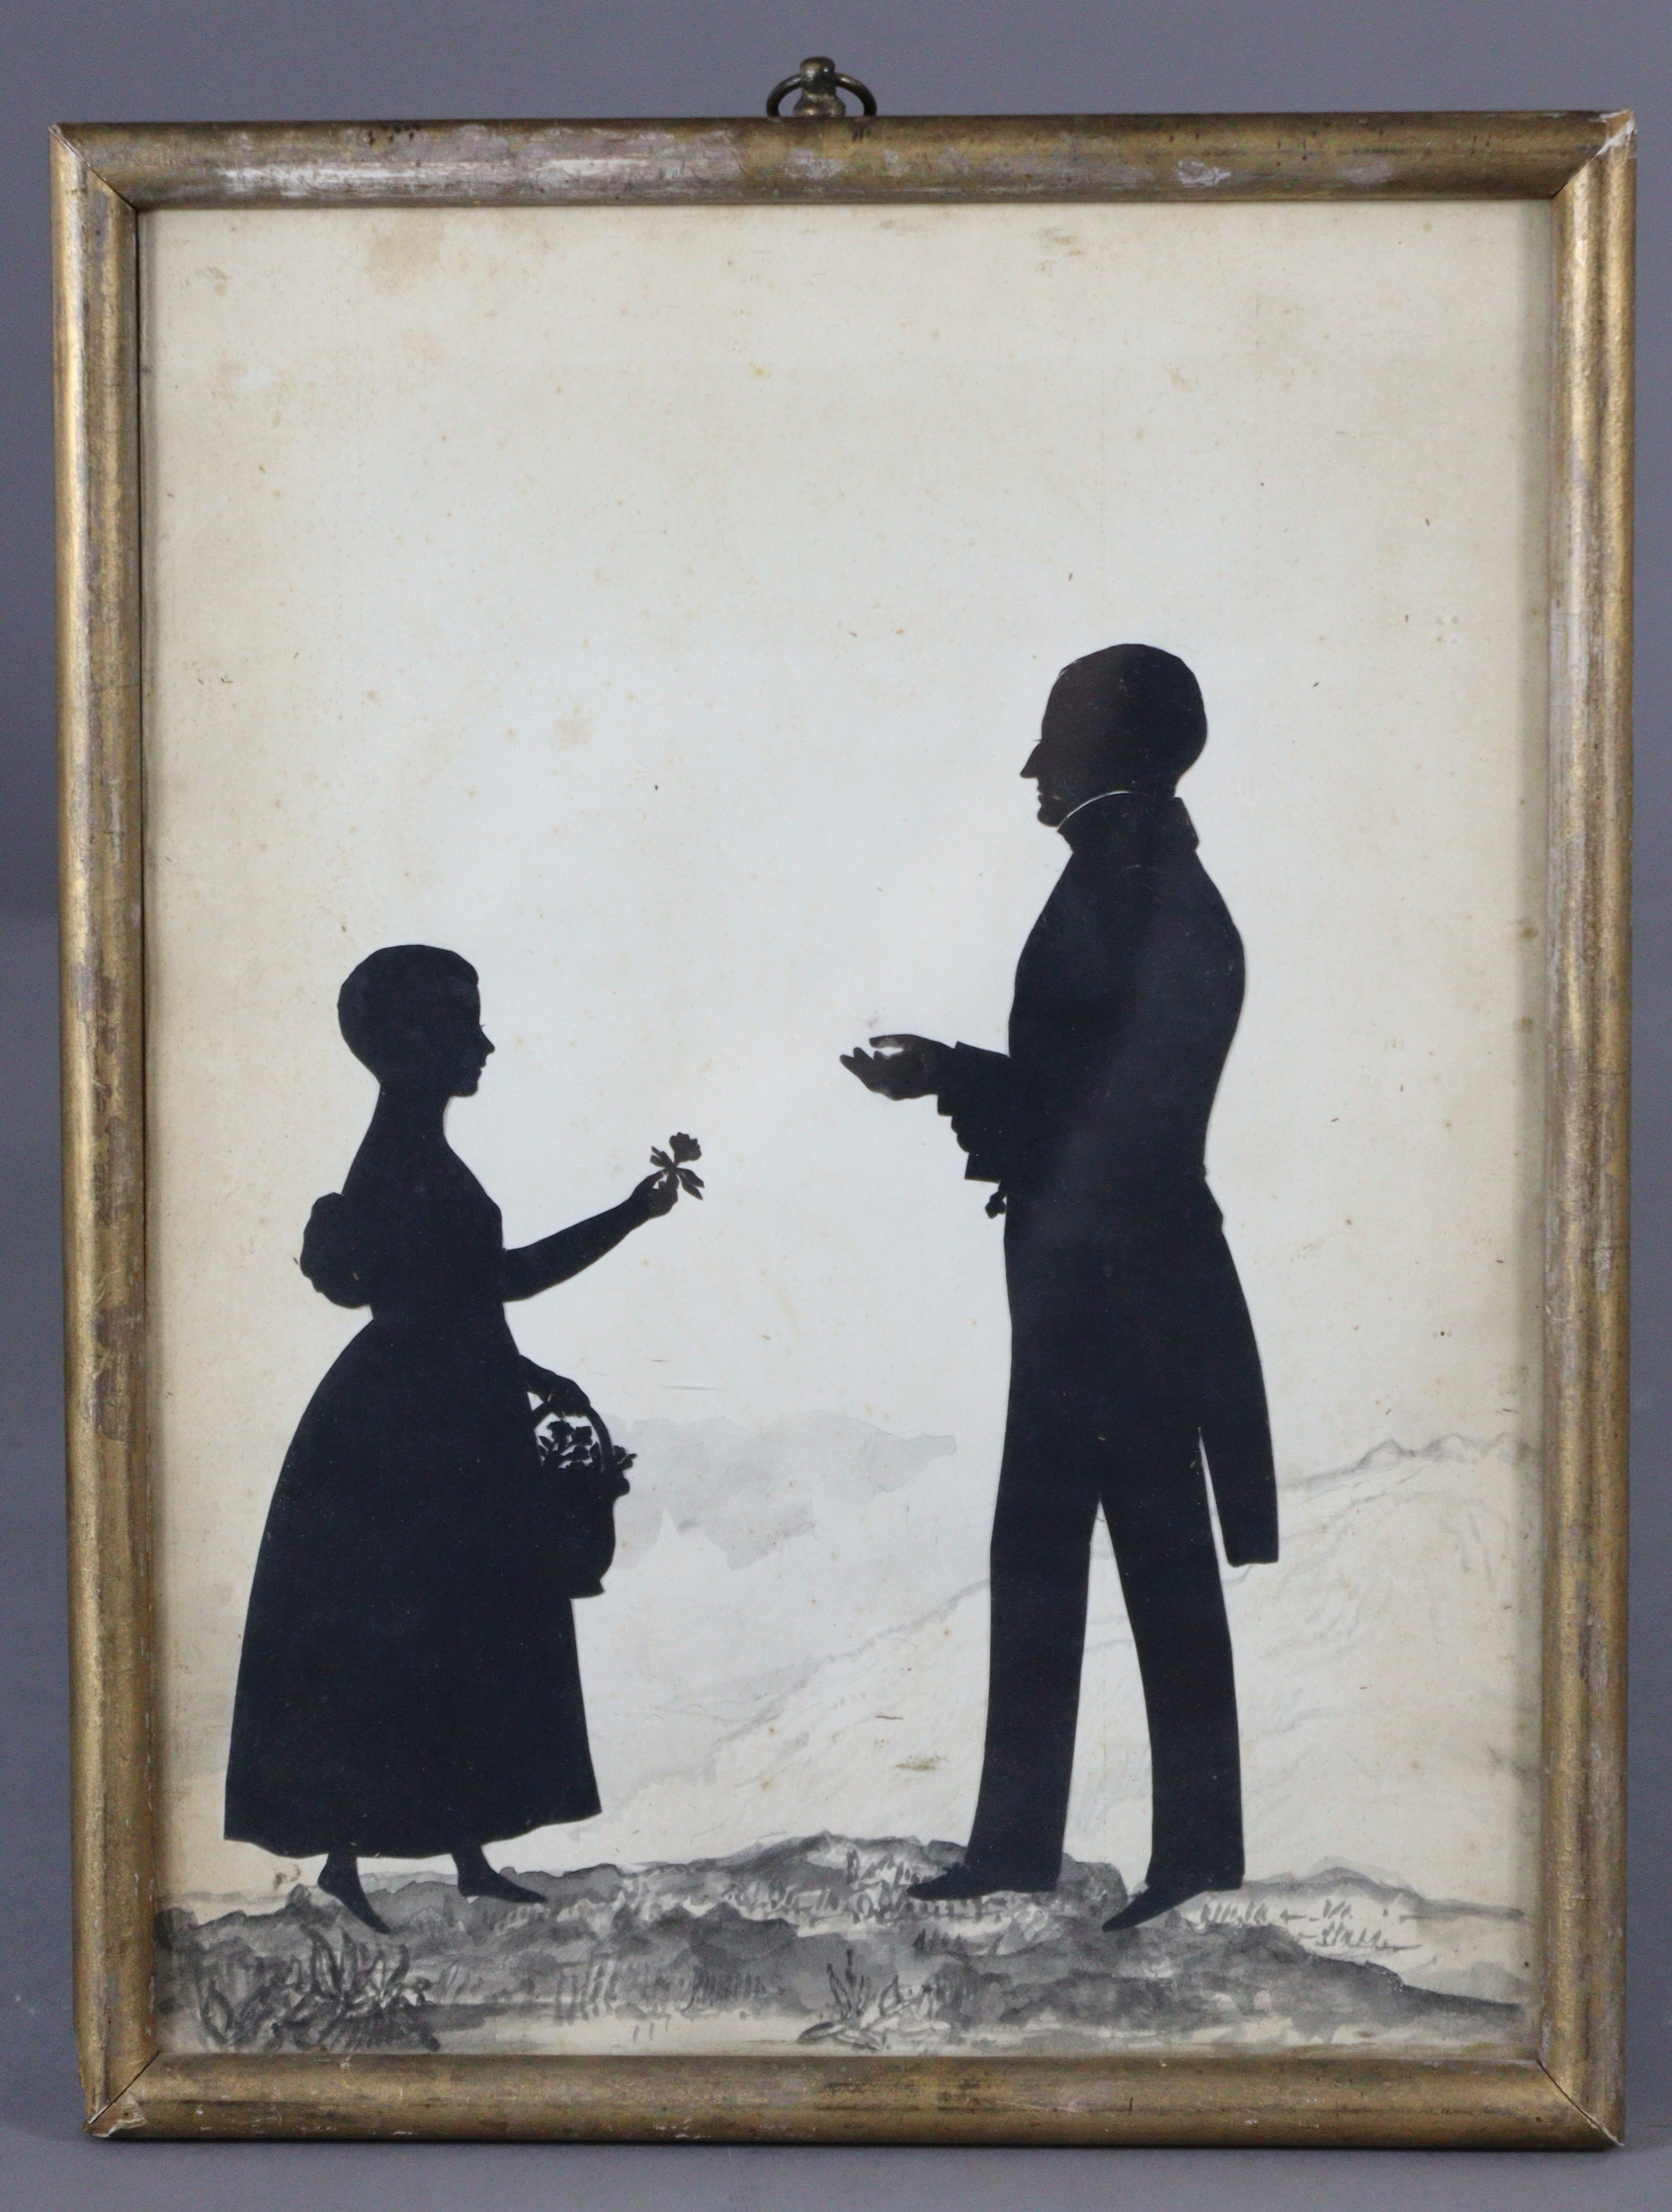 A 19th century silhouette of JONATHAN SISSON COOPER (1777-1850) & his daughter Charlotte Louise,